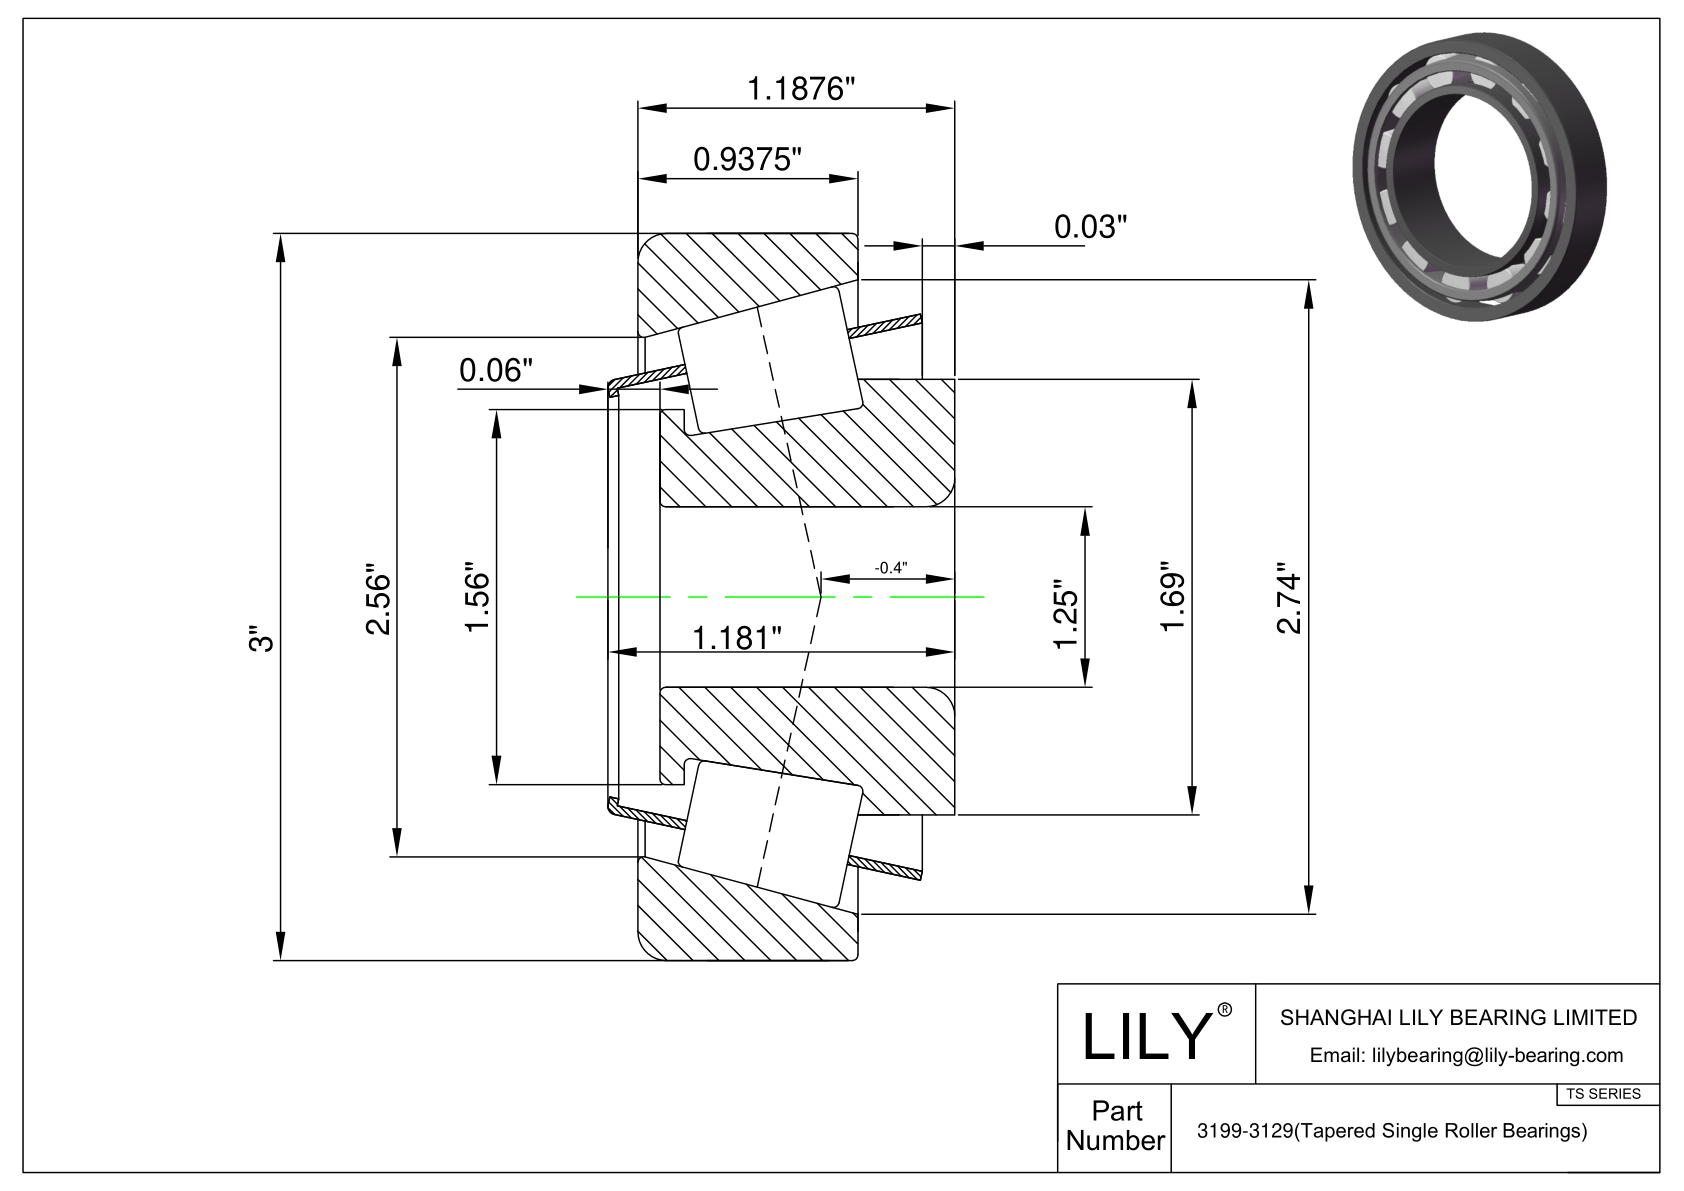 3199-3129 TS (Tapered Single Roller Bearings) (Imperial) cad drawing